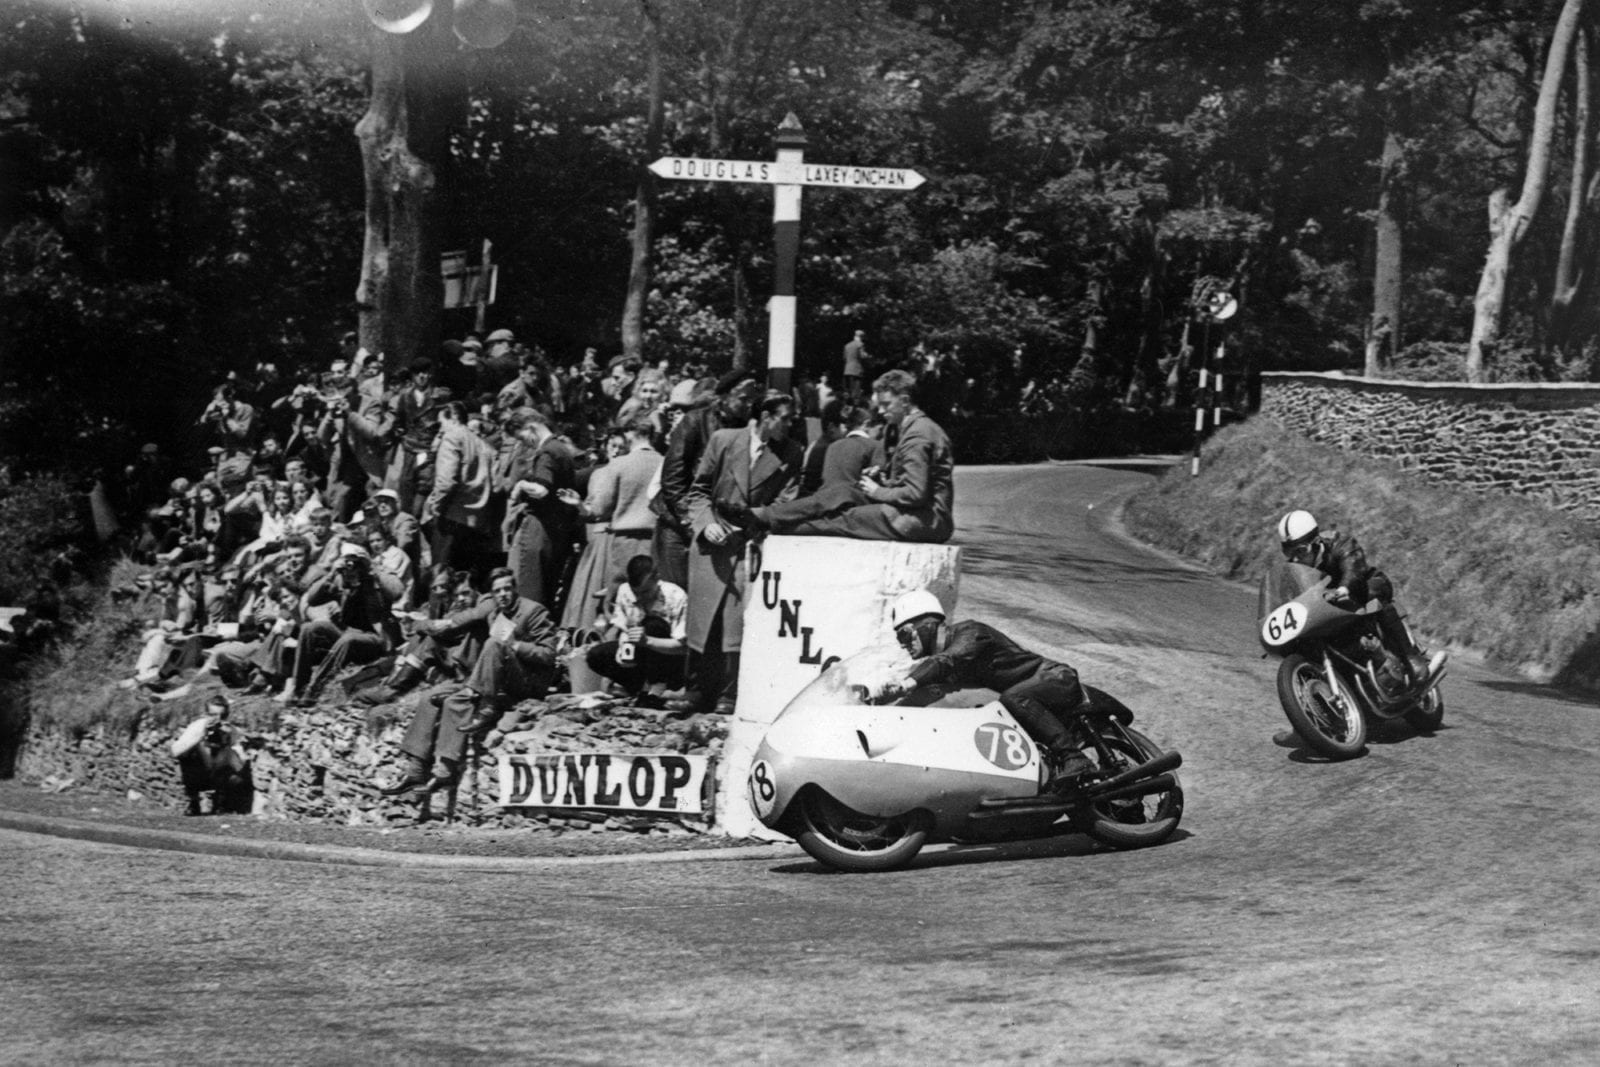 Bob McIntyre rounds the Governor's Bridge hairpin in the 1957 Isle of Man Senior TT